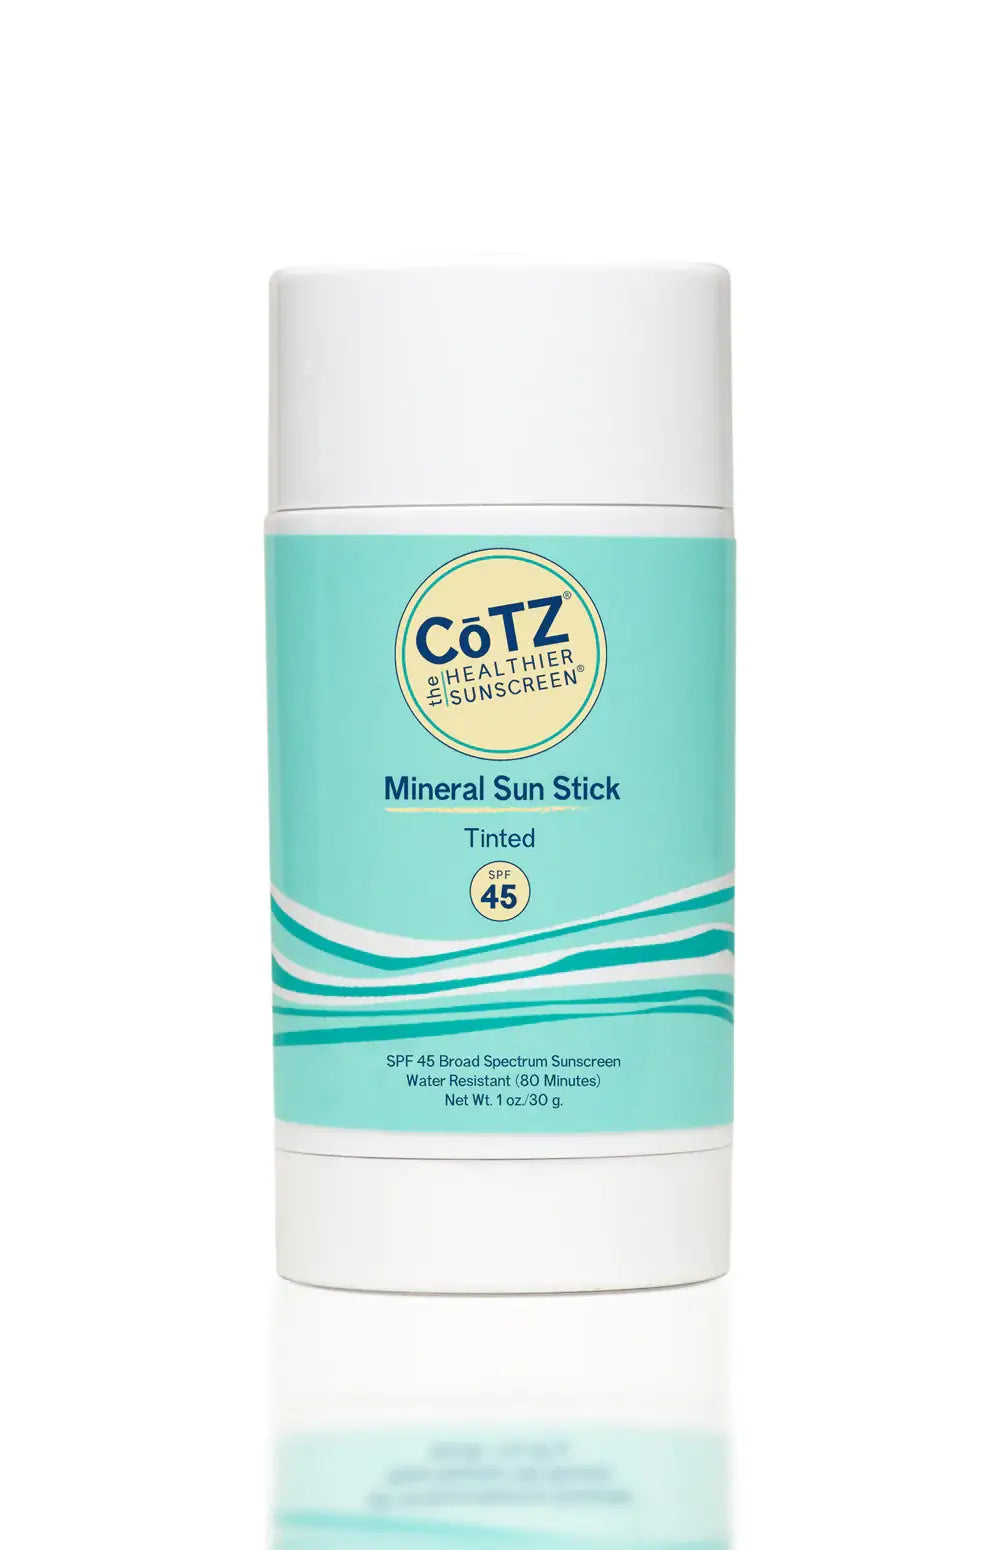 Mineral sunscreen stick travel vacation tinted for all skin types sheer subtle luminescence preservative free reef friendly SPF board spectrum coverage Modern smart causal female chic effortless outfit womens ladies gift elegant effortless clothing everyday stylish clothes apparel outfits chic winter summer style women’s boutique trendy teacher office cute outfit boutique clothes fashion quality work from home coastal beachy lounge athleisure gift for her midsize curvy sizes  